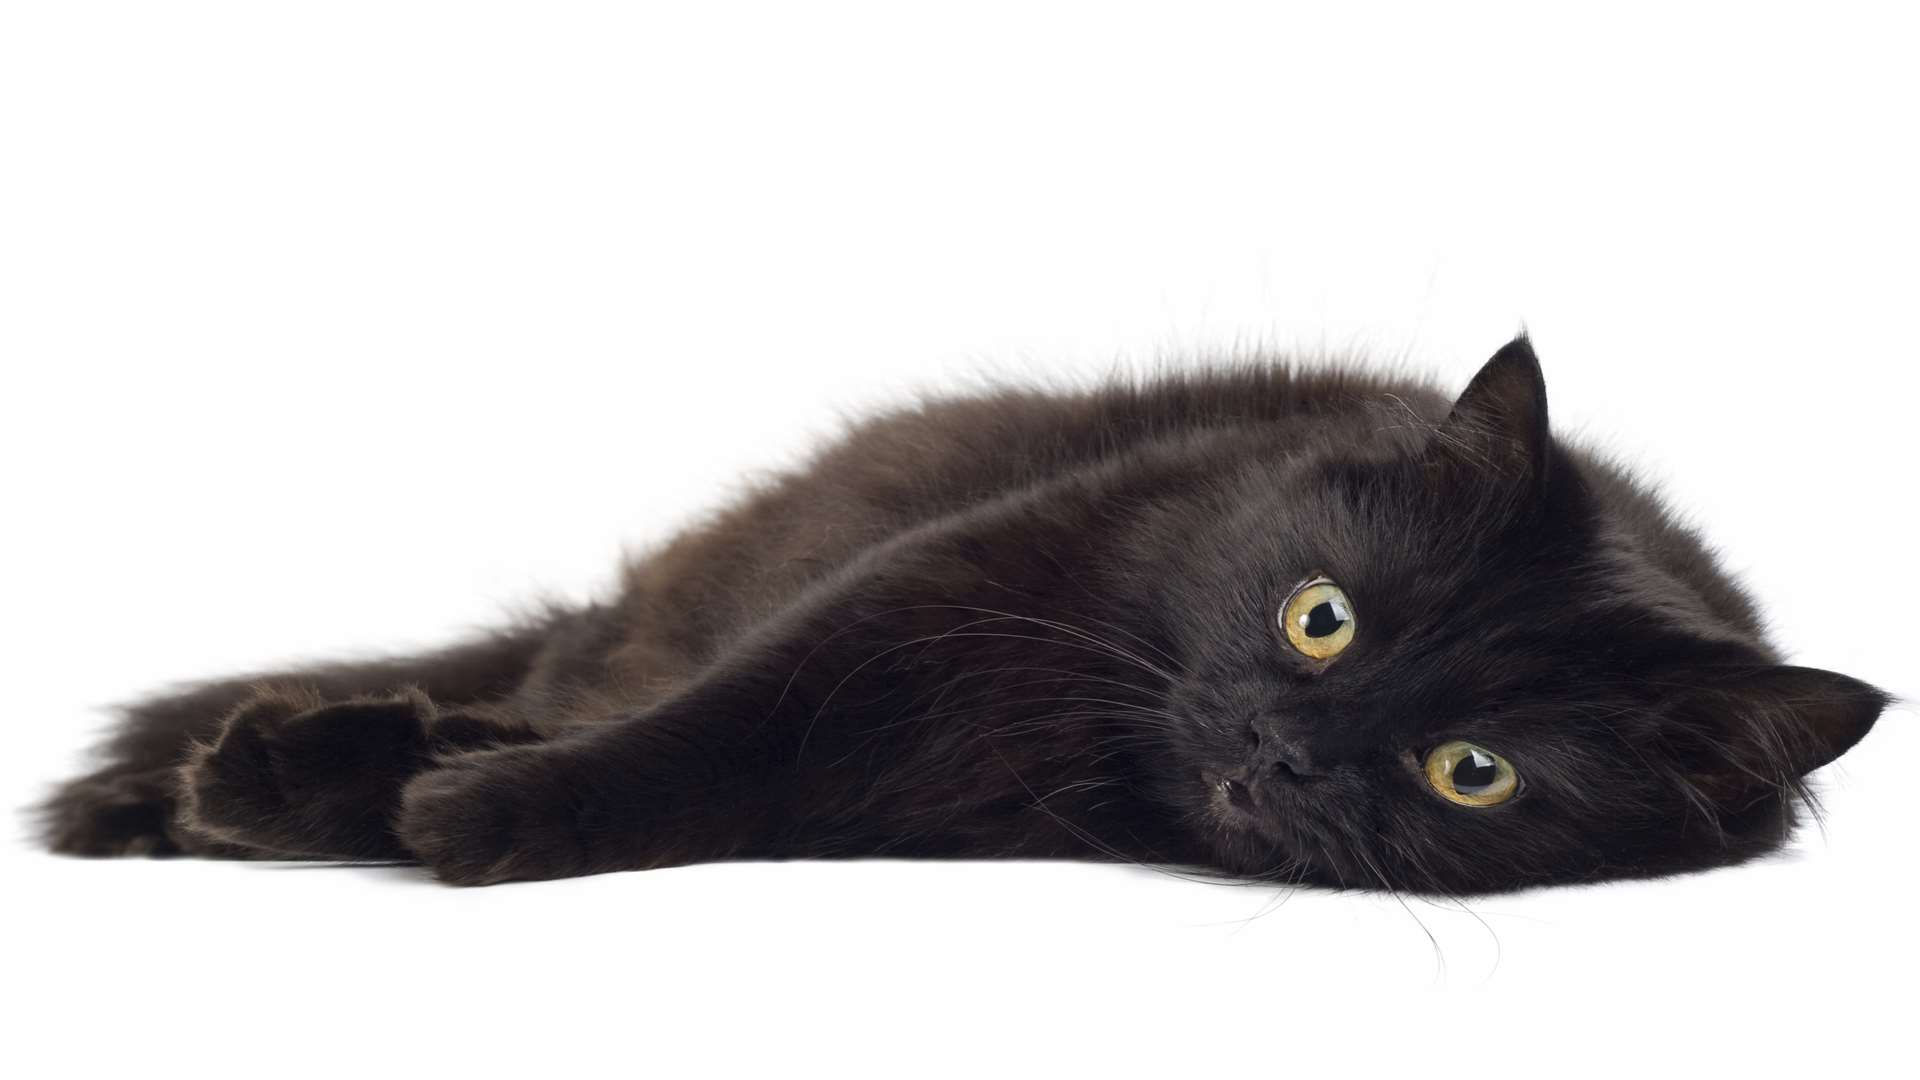 Many black cats are overlooked by prospective owners